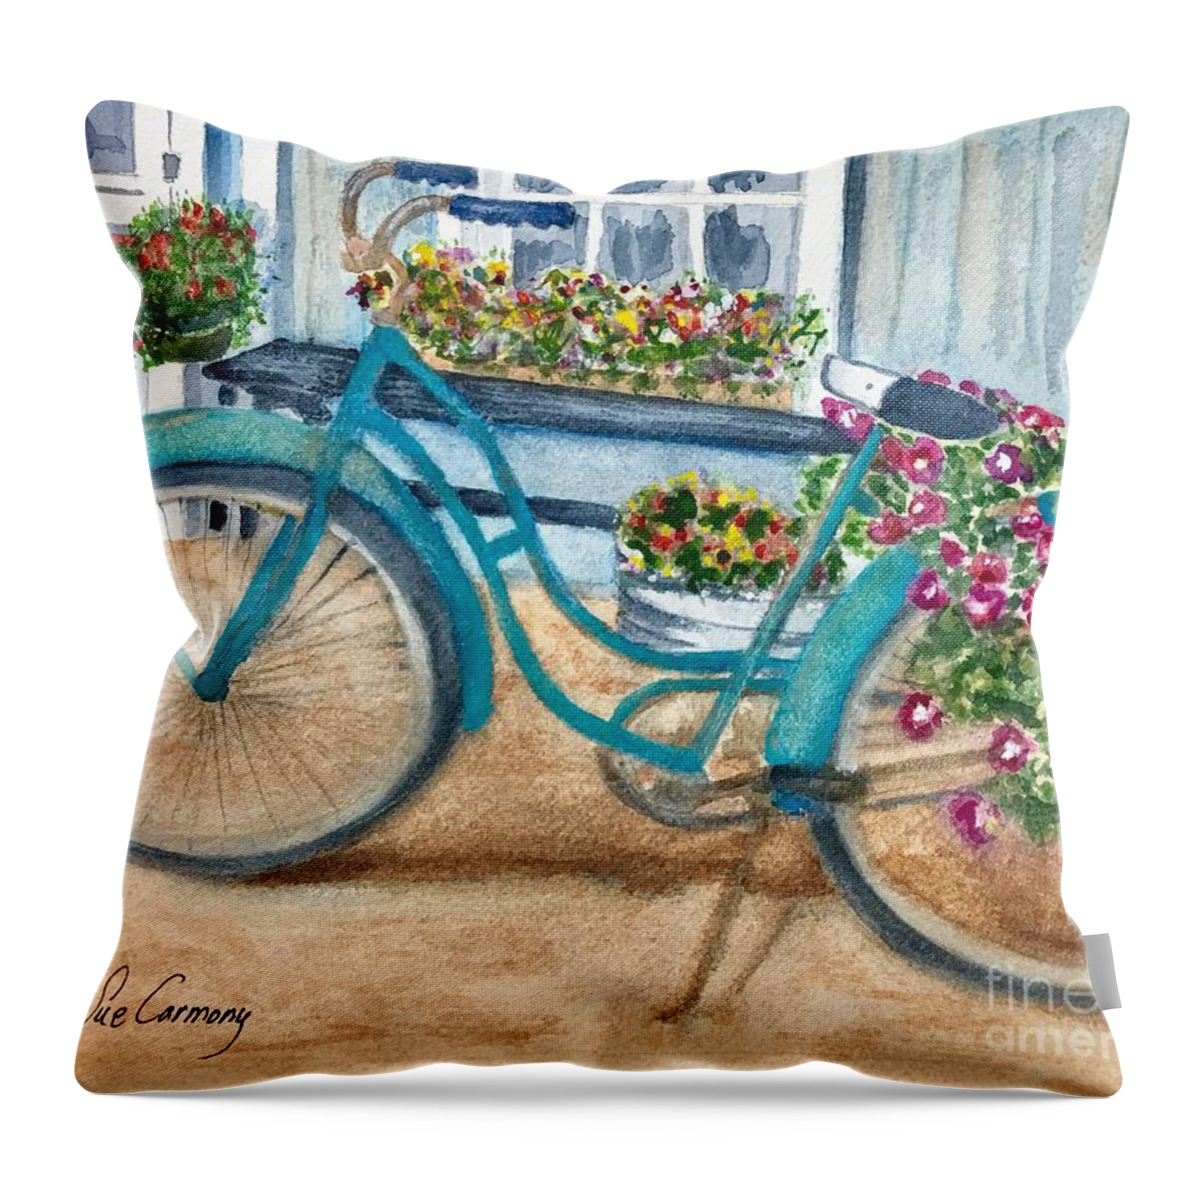 Bike Throw Pillow featuring the painting Summertime by Sue Carmony